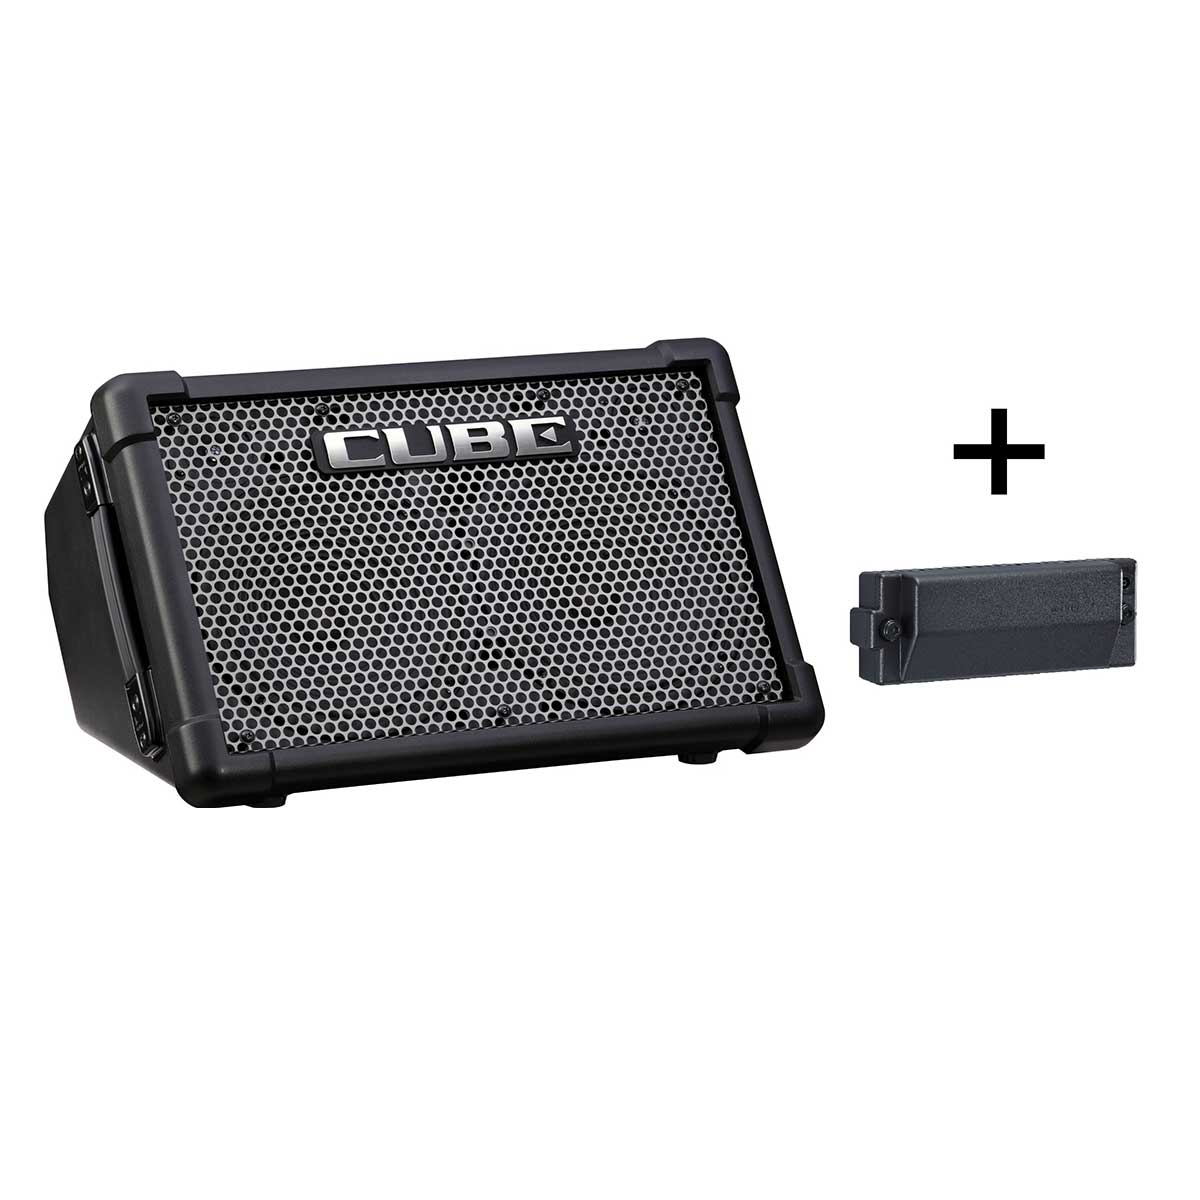 Roland CUBE Street EX with the rechargeable battery pack